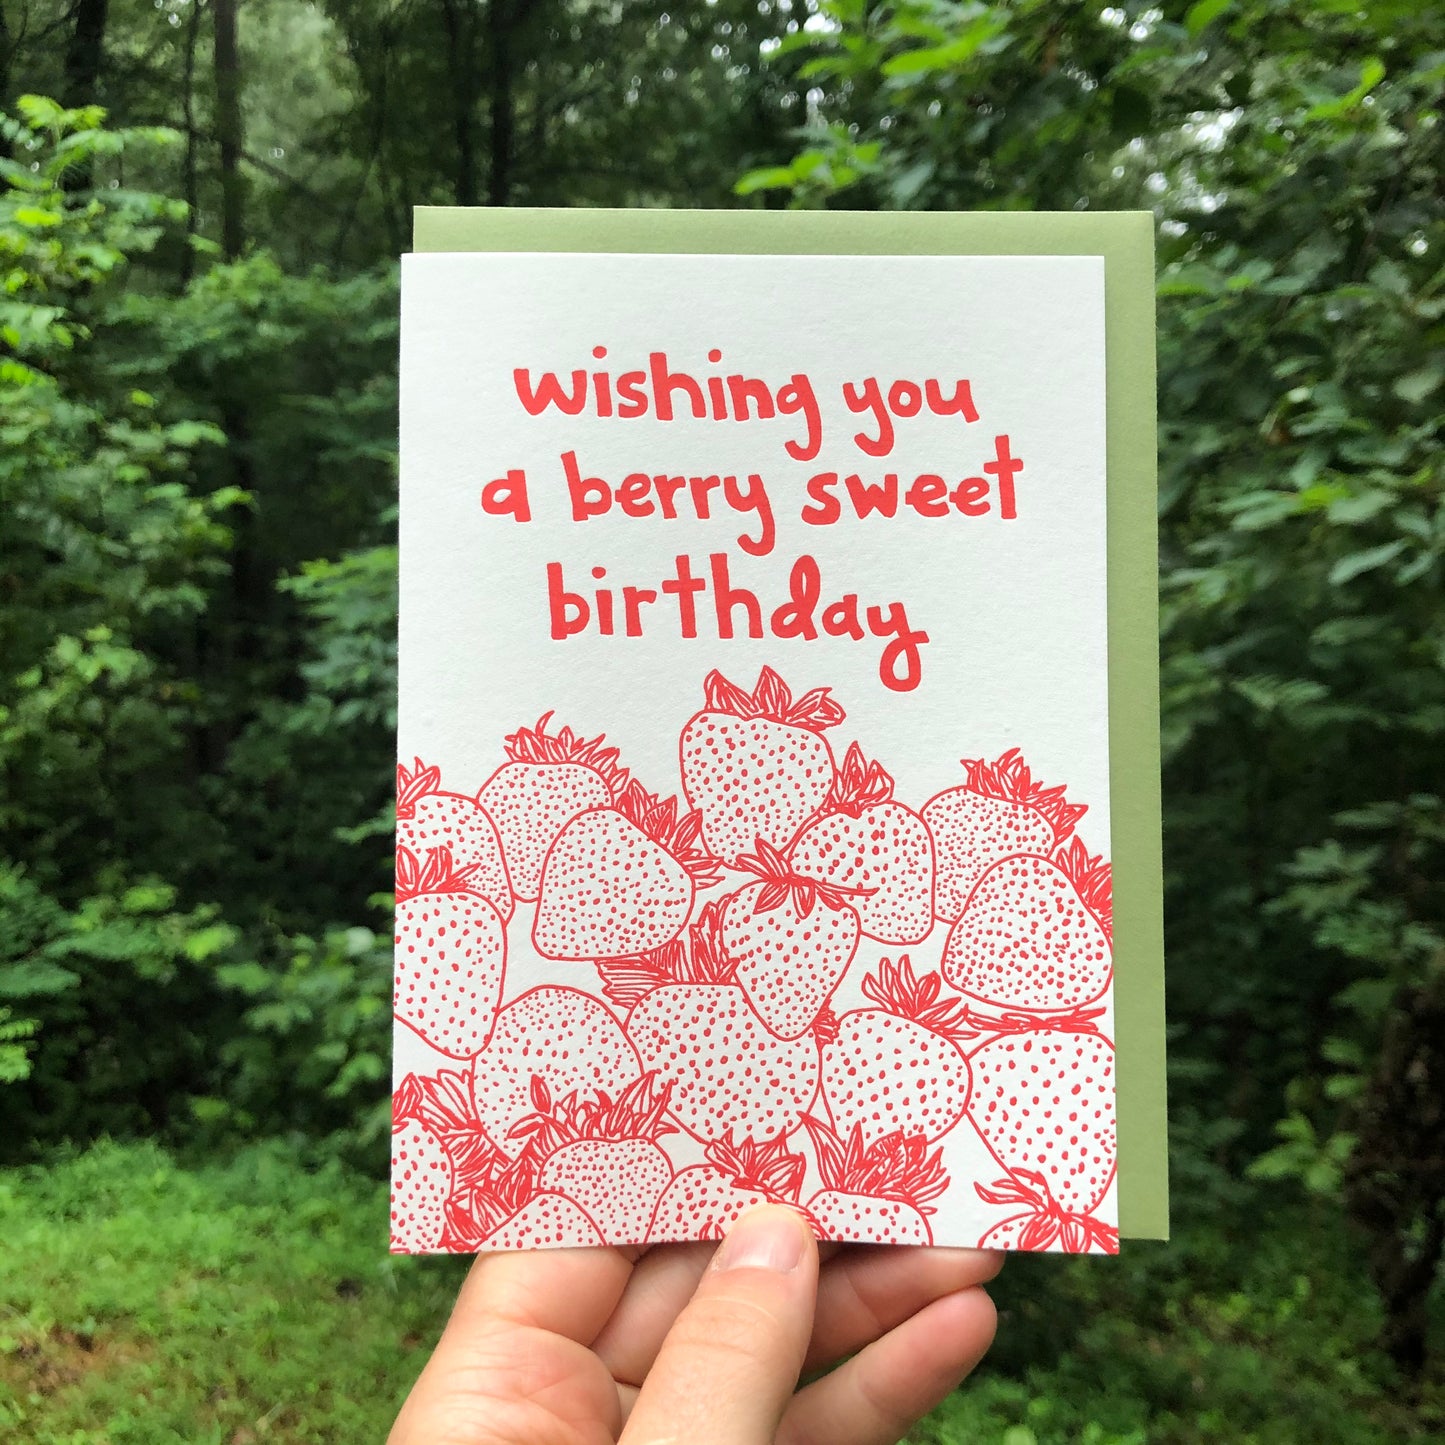 Letterpress greeting card featuring hand-drawn strawberries printed in a vibrant red ink. "Wishing you a Berry Sweet Birthday!" is written at the top of the card in a whimsical hand-drawn text, printed in the same red ink. The card is white, blank inside, and is paired with a deep green envelope. Card is held in front of a lush green summer forest outside. 